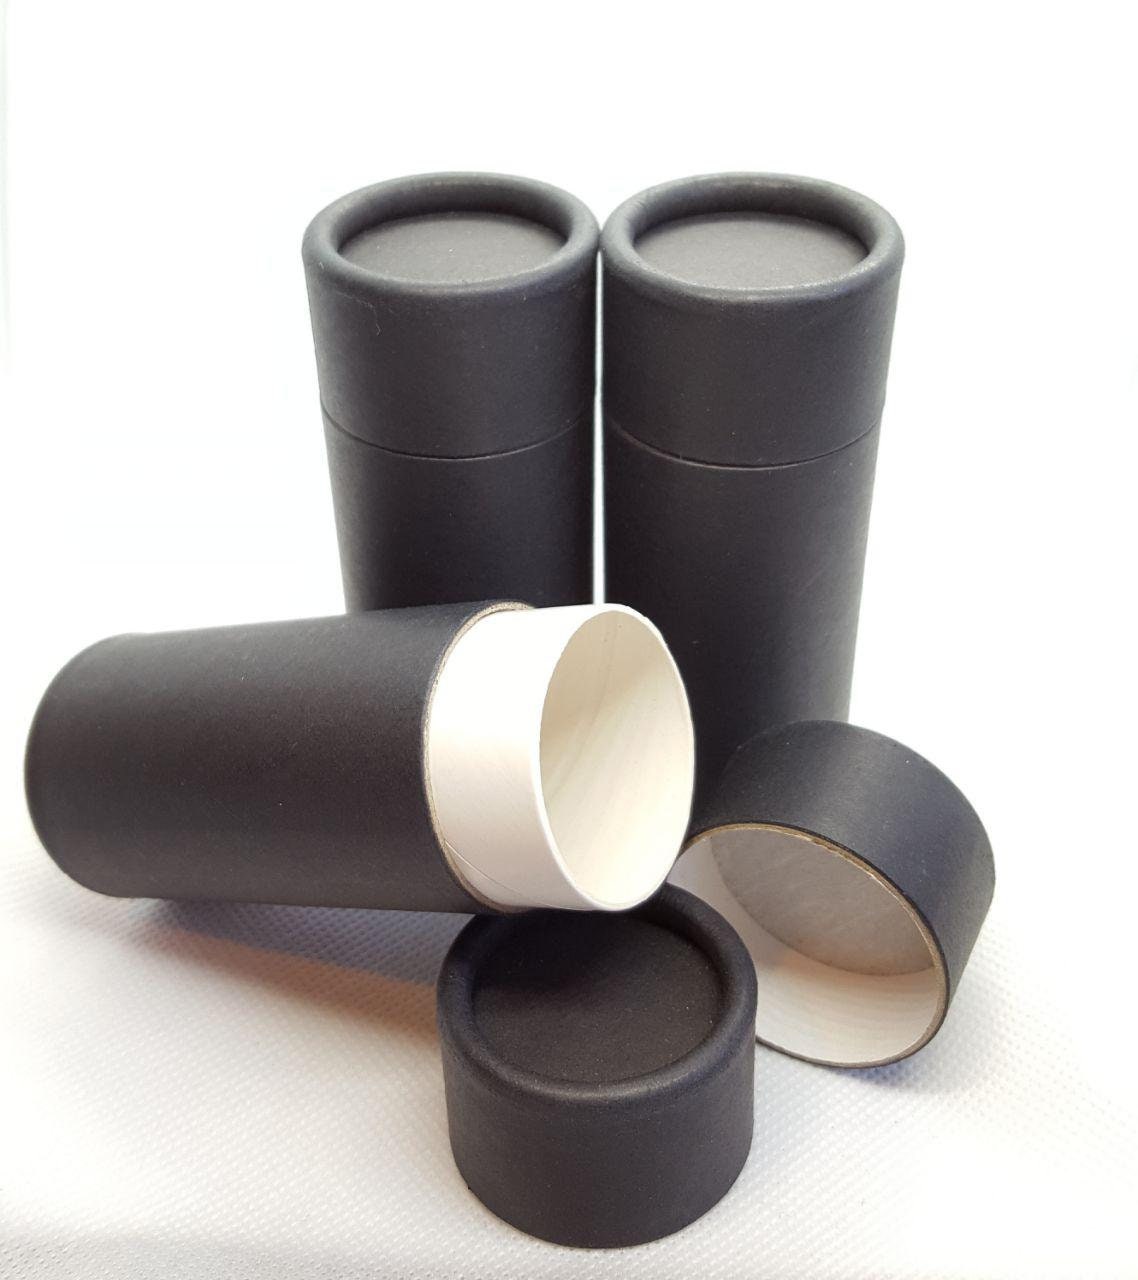 Cardboard Tubes, Empty Rolls for Upcycled Craft Projects With